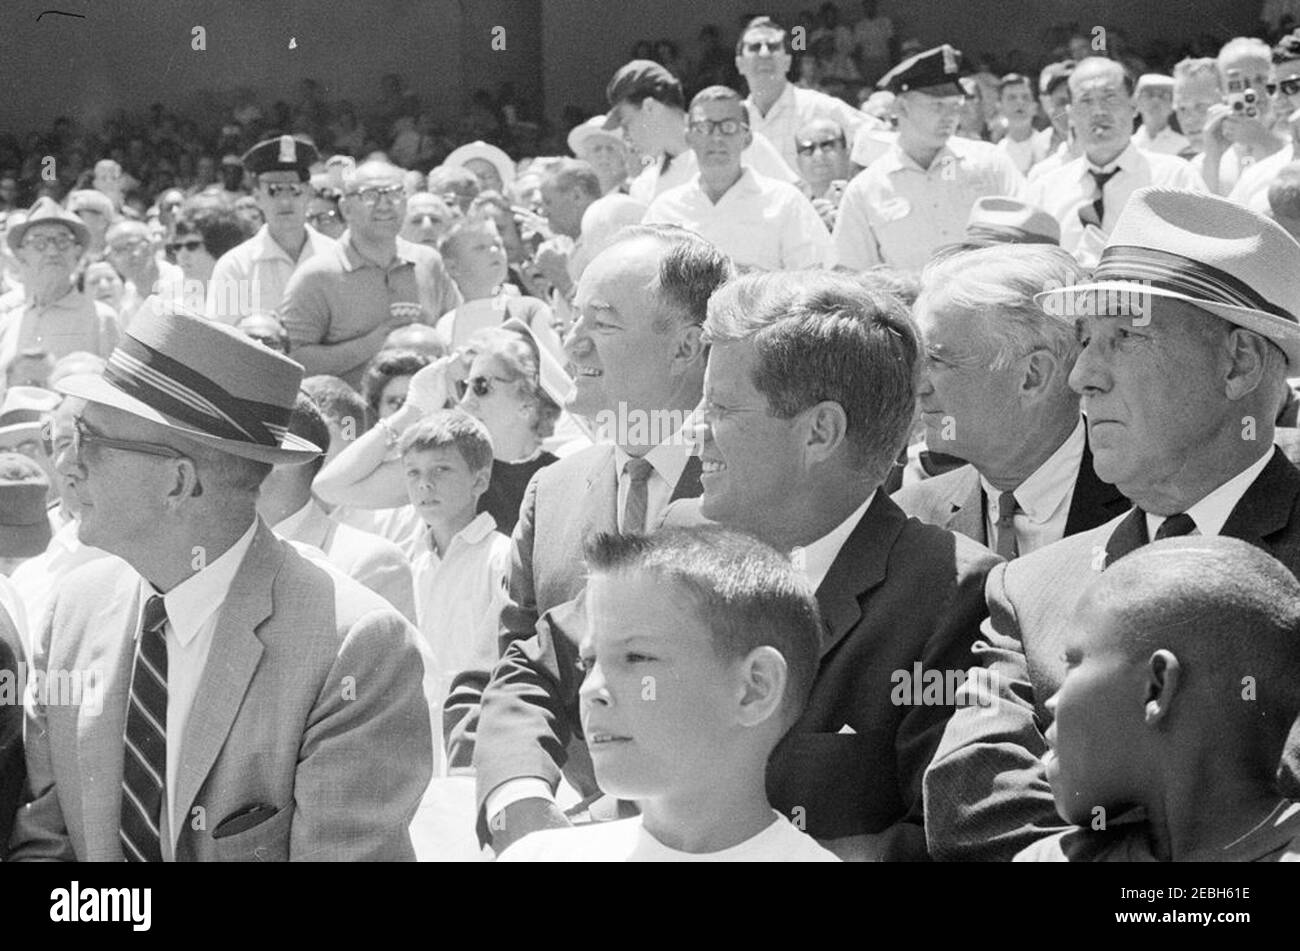 1962 All Star Baseball Game at D.C. Stadium, 12:52PM. President John F. Kennedy and others watch the 32nd Major League Baseball (MLB) All-Star Game at D.C. Stadium, Washington, D.C. Those pictured with President Kennedy include: Special Assistant to the President, Dave Powers; Senator Hubert H. Humphrey (Minnesota); Senator Stuart Symington (Missouri); Commissioner of Baseball, Ford C. Frick; members of the Washington Metropolitan Police Boys Club, Dennis Marcel and Frank Brown. Stock Photo